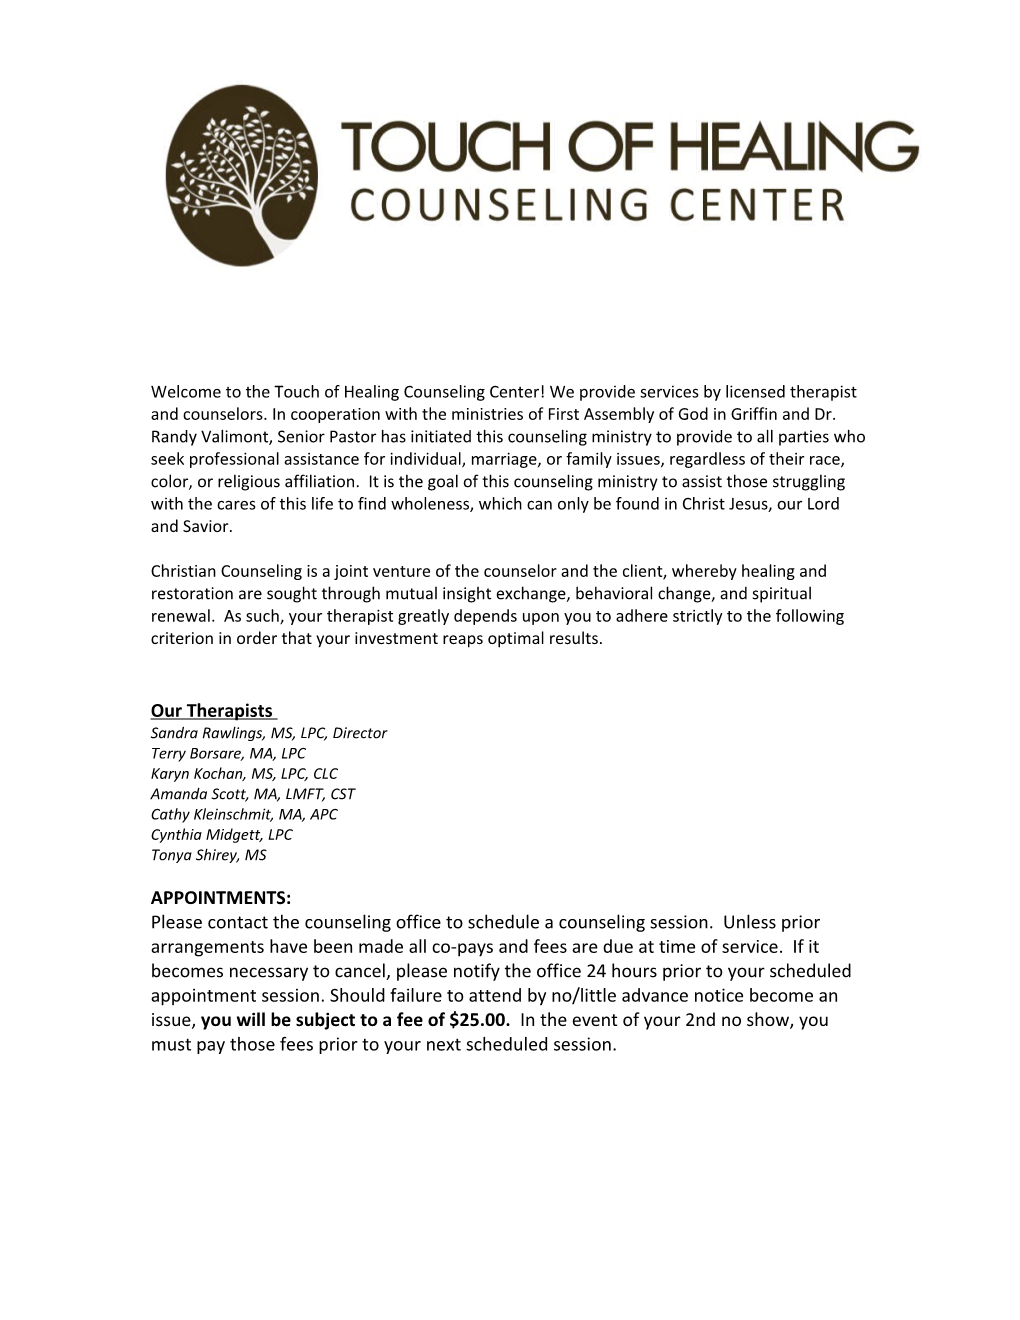 Fresh Touch of Healing Counseling Center